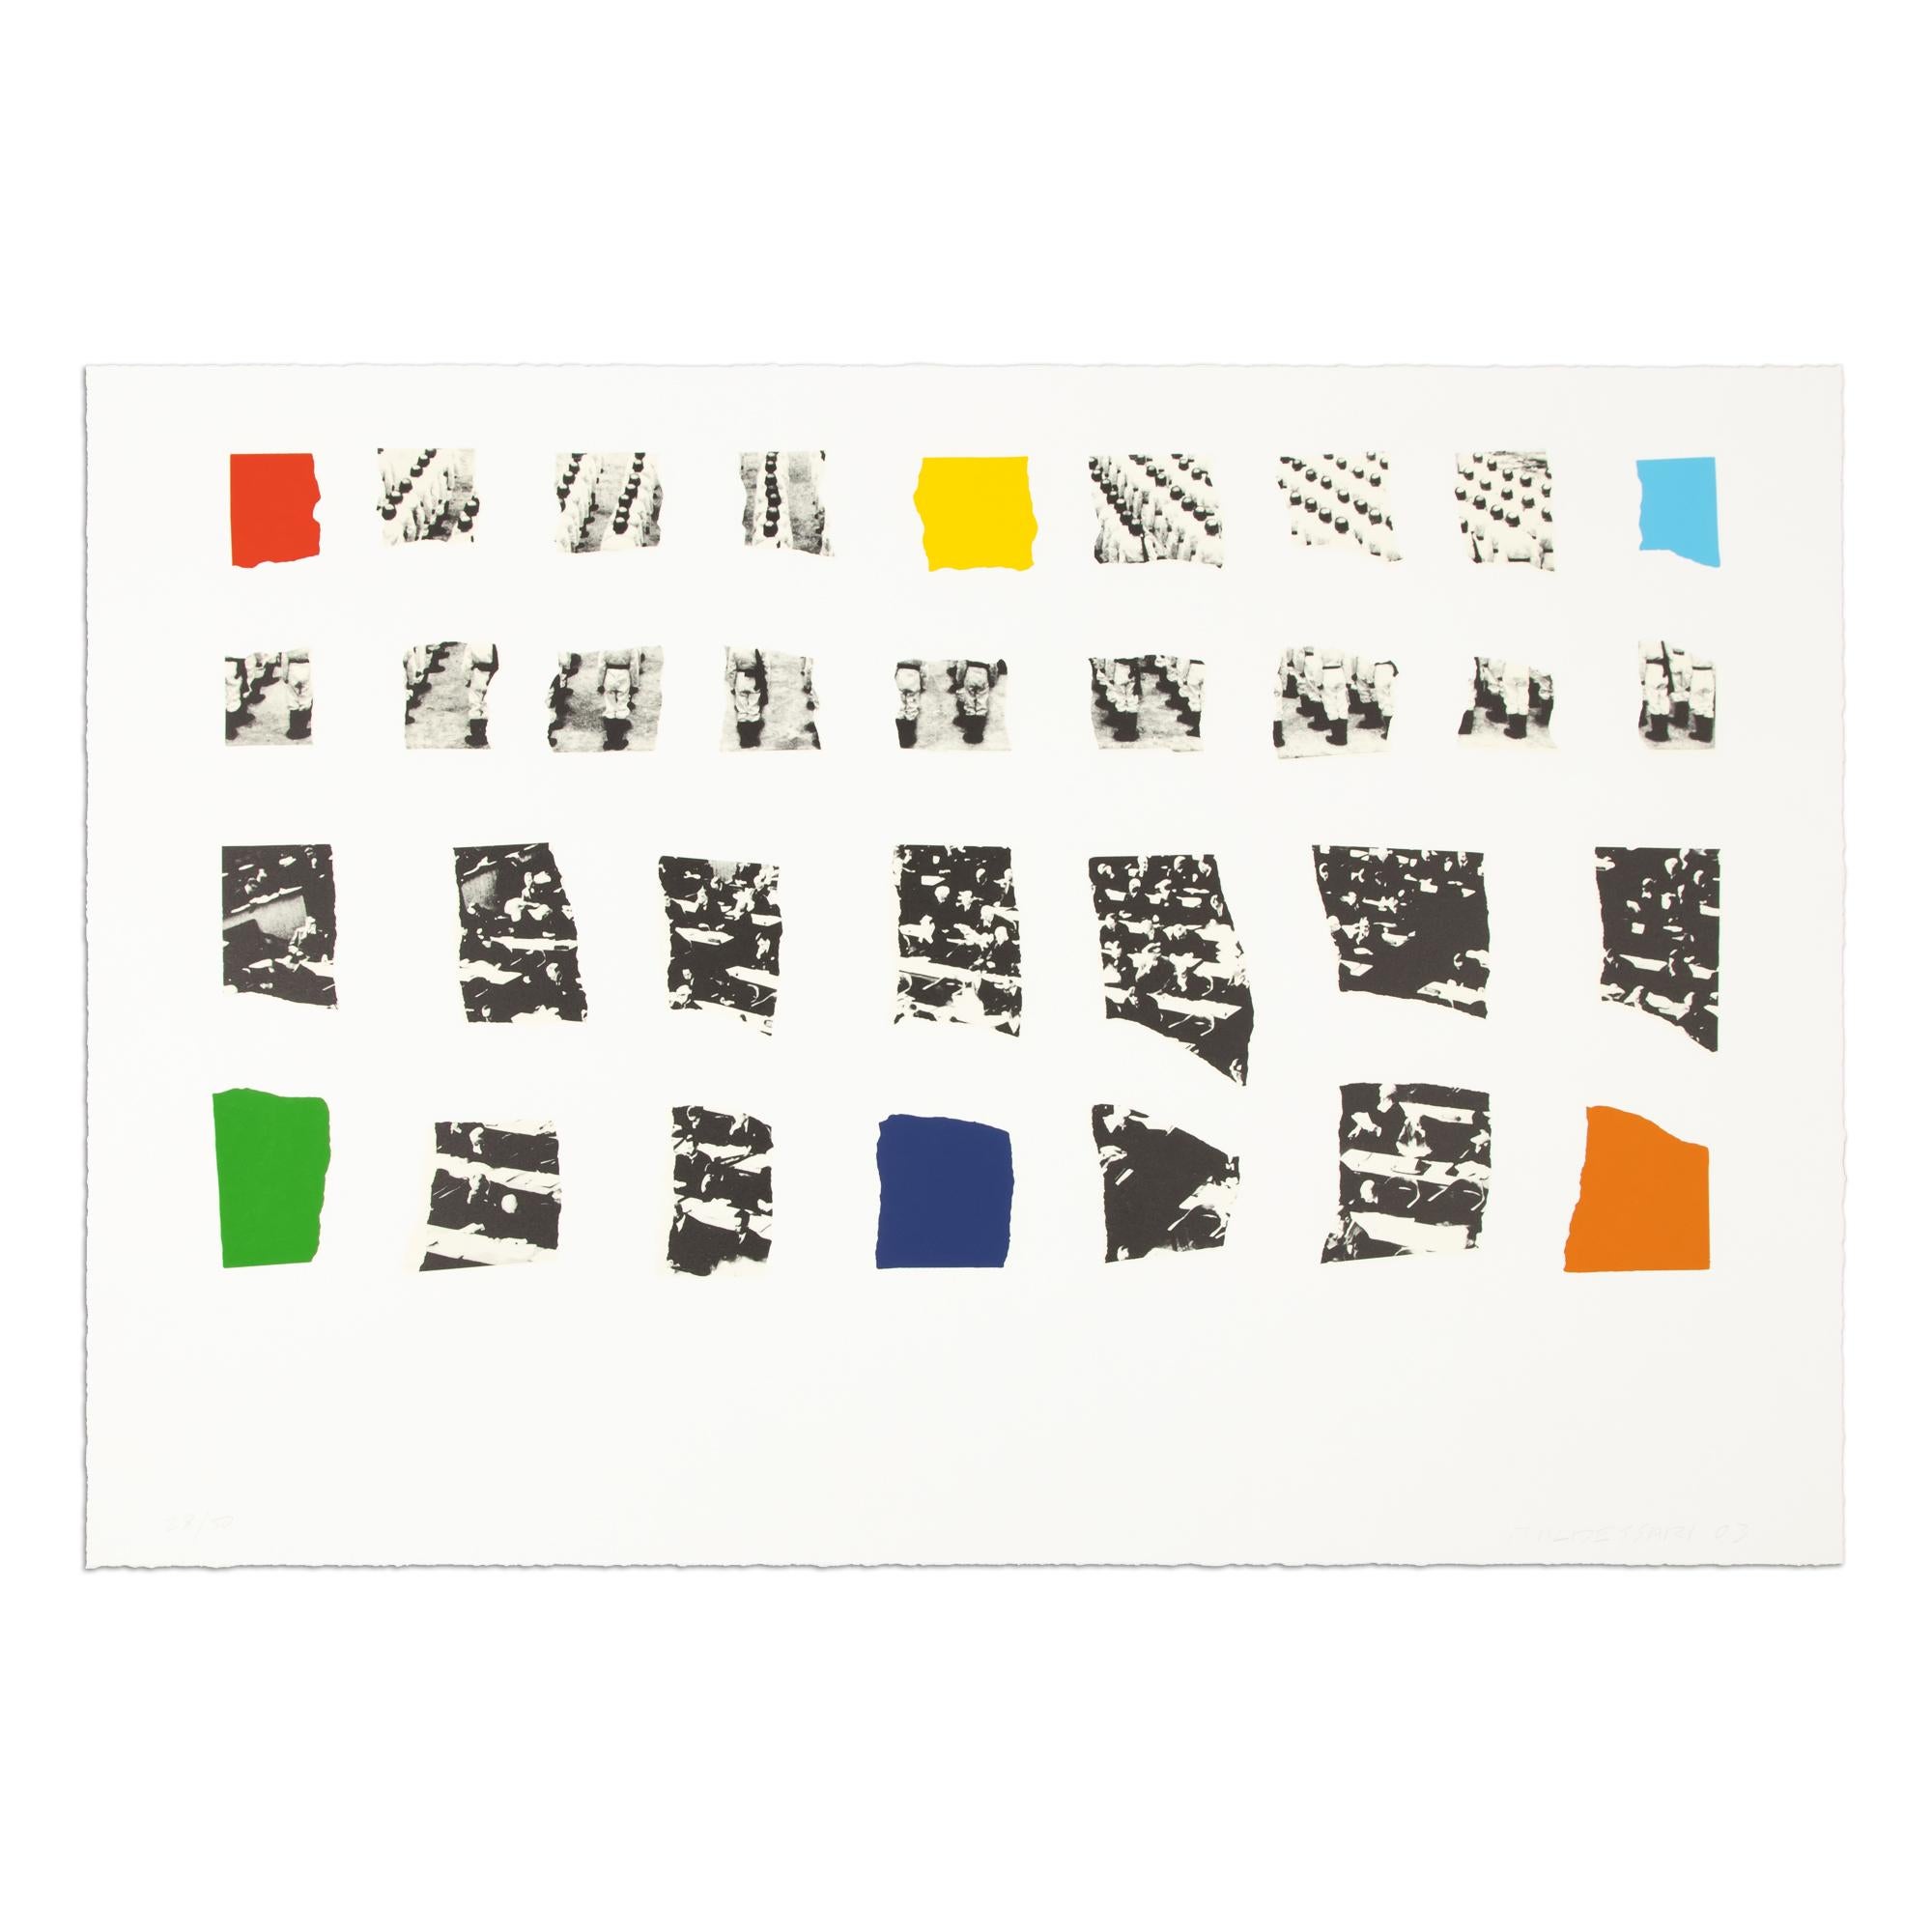 John Baldessari (American, 1931-2020)
Two Assemblages (with R, O, Y, G, B, V Opaque), 2003
Medium: Lithograph and screen print on vellum
Dimensions: 61.6 x 91.5 cm
Edition of 50: Hand-signed, numbered and dated
Condition: Excellent